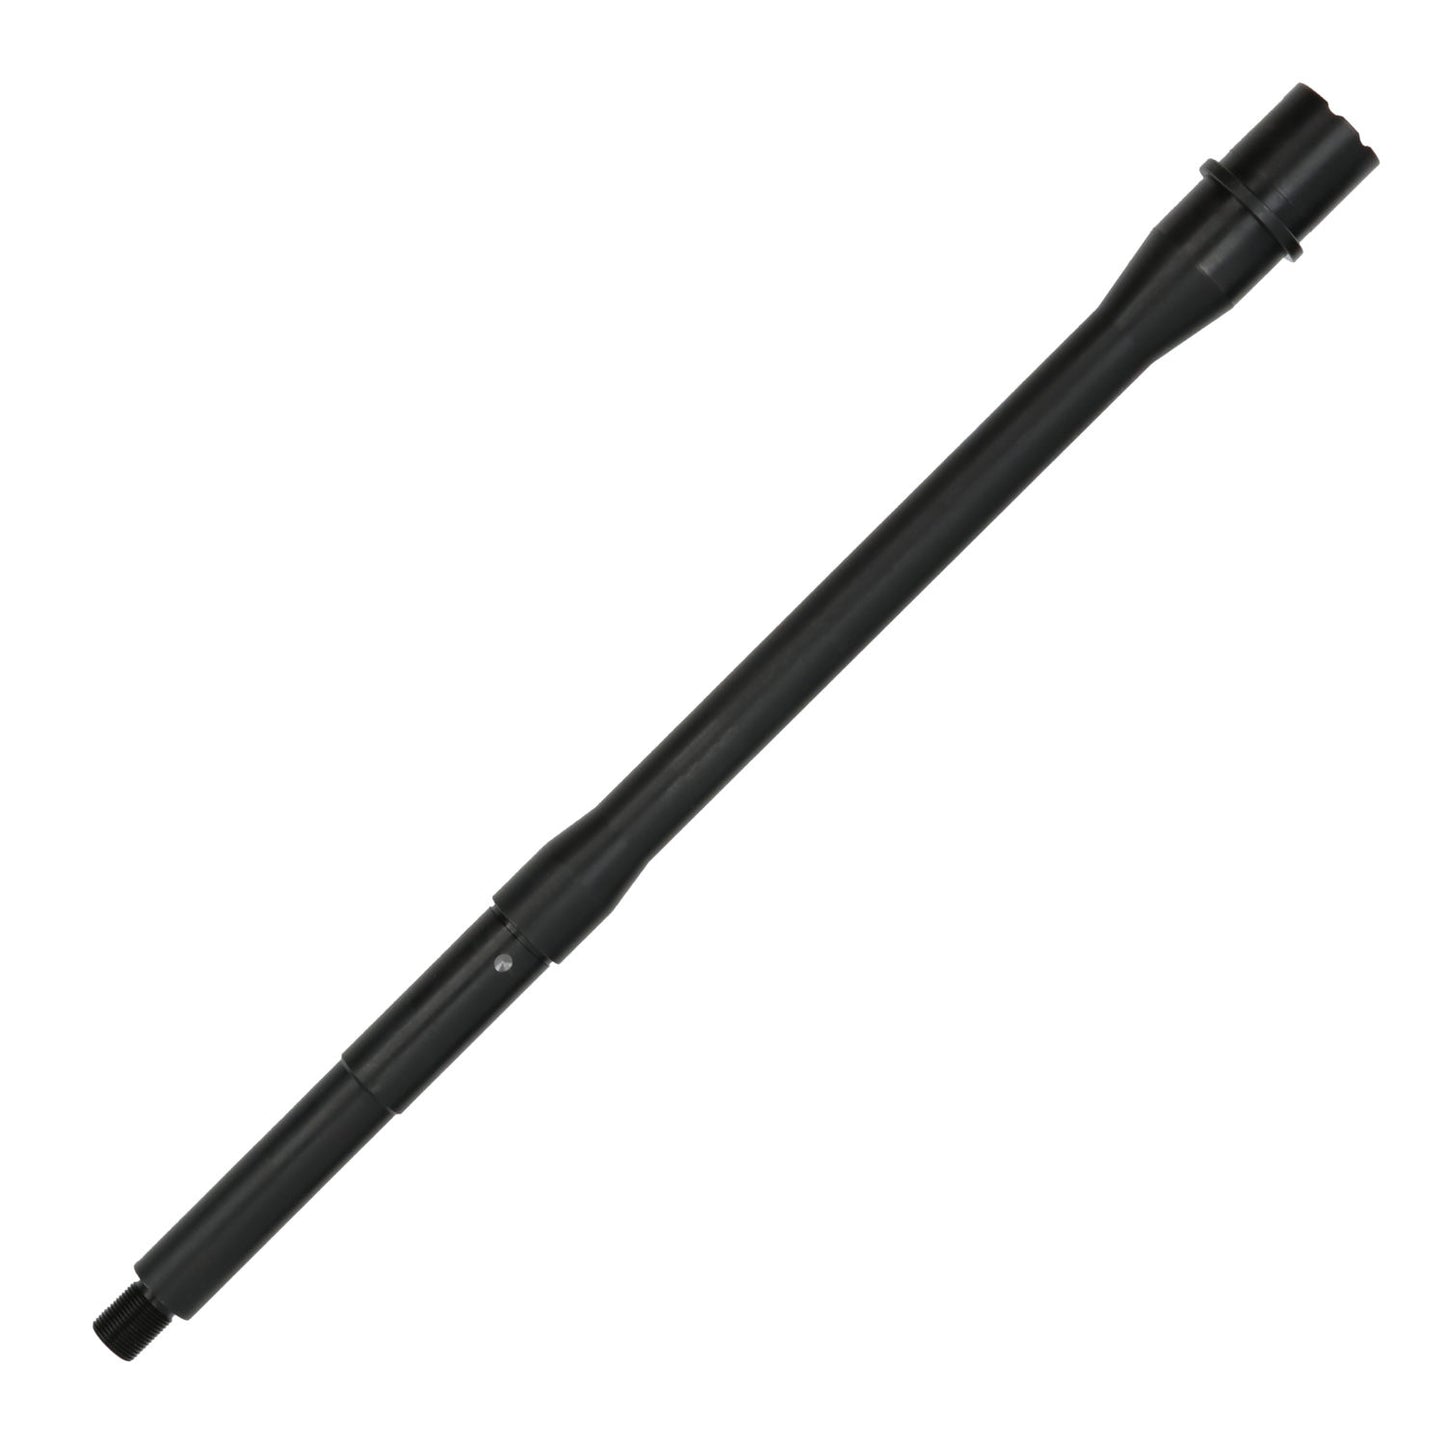 BKF AR15 14.5" 5.56 NATO Mid-Length 1:7 Twist Government Profile Barrel - Dimpled